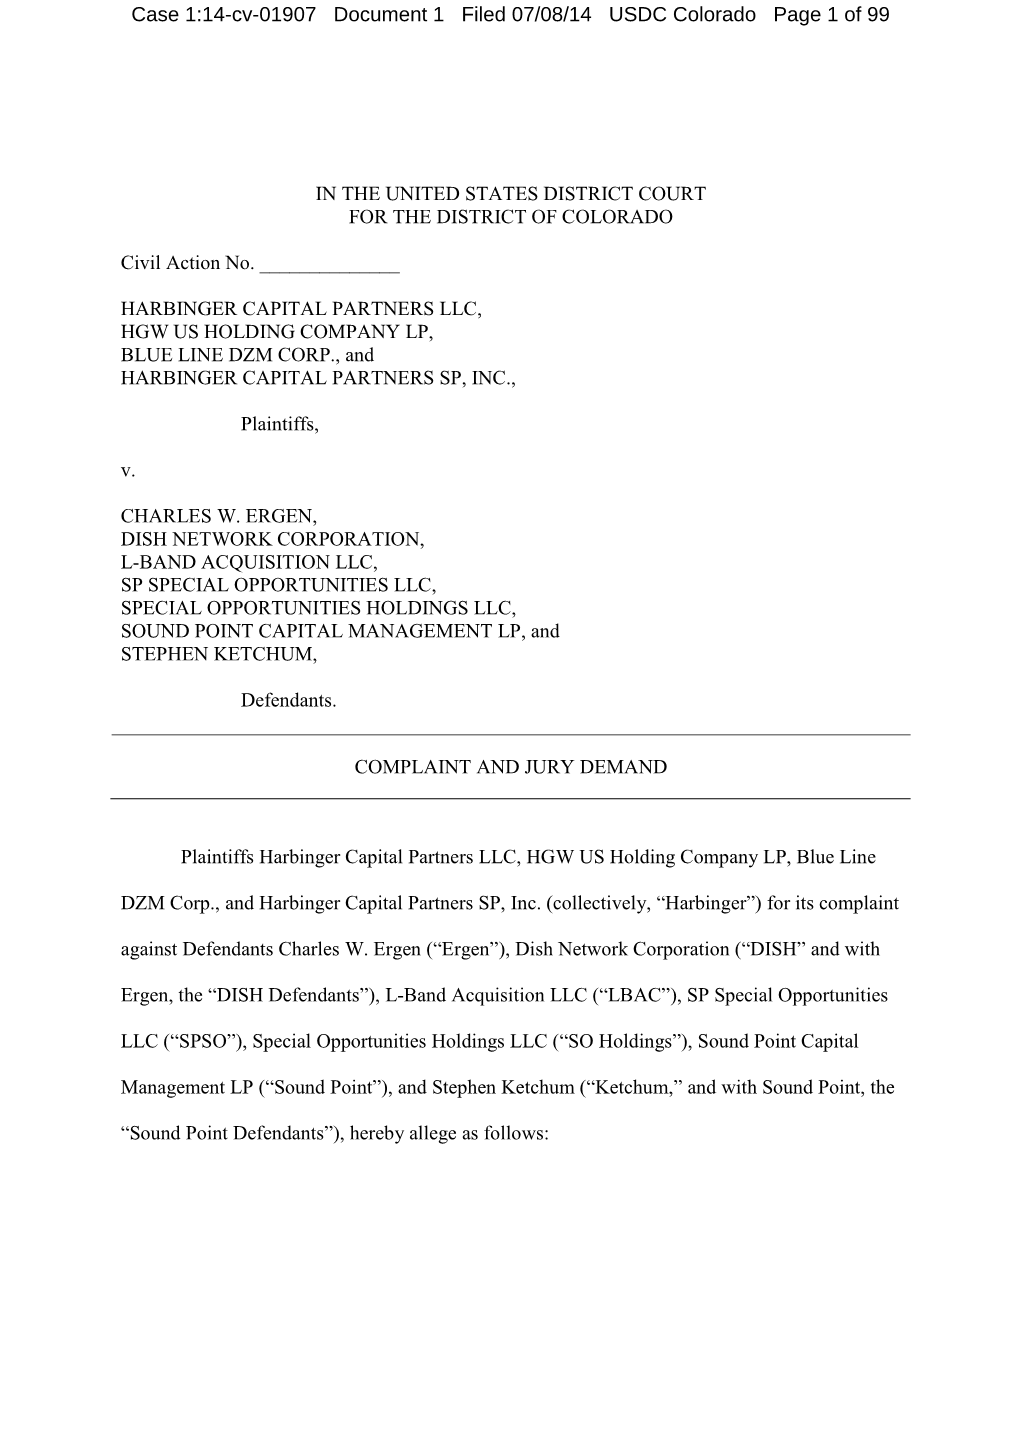 Case 1:14-Cv-01907 Document 1 Filed 07/08/14 USDC Colorado Page 1 of 99